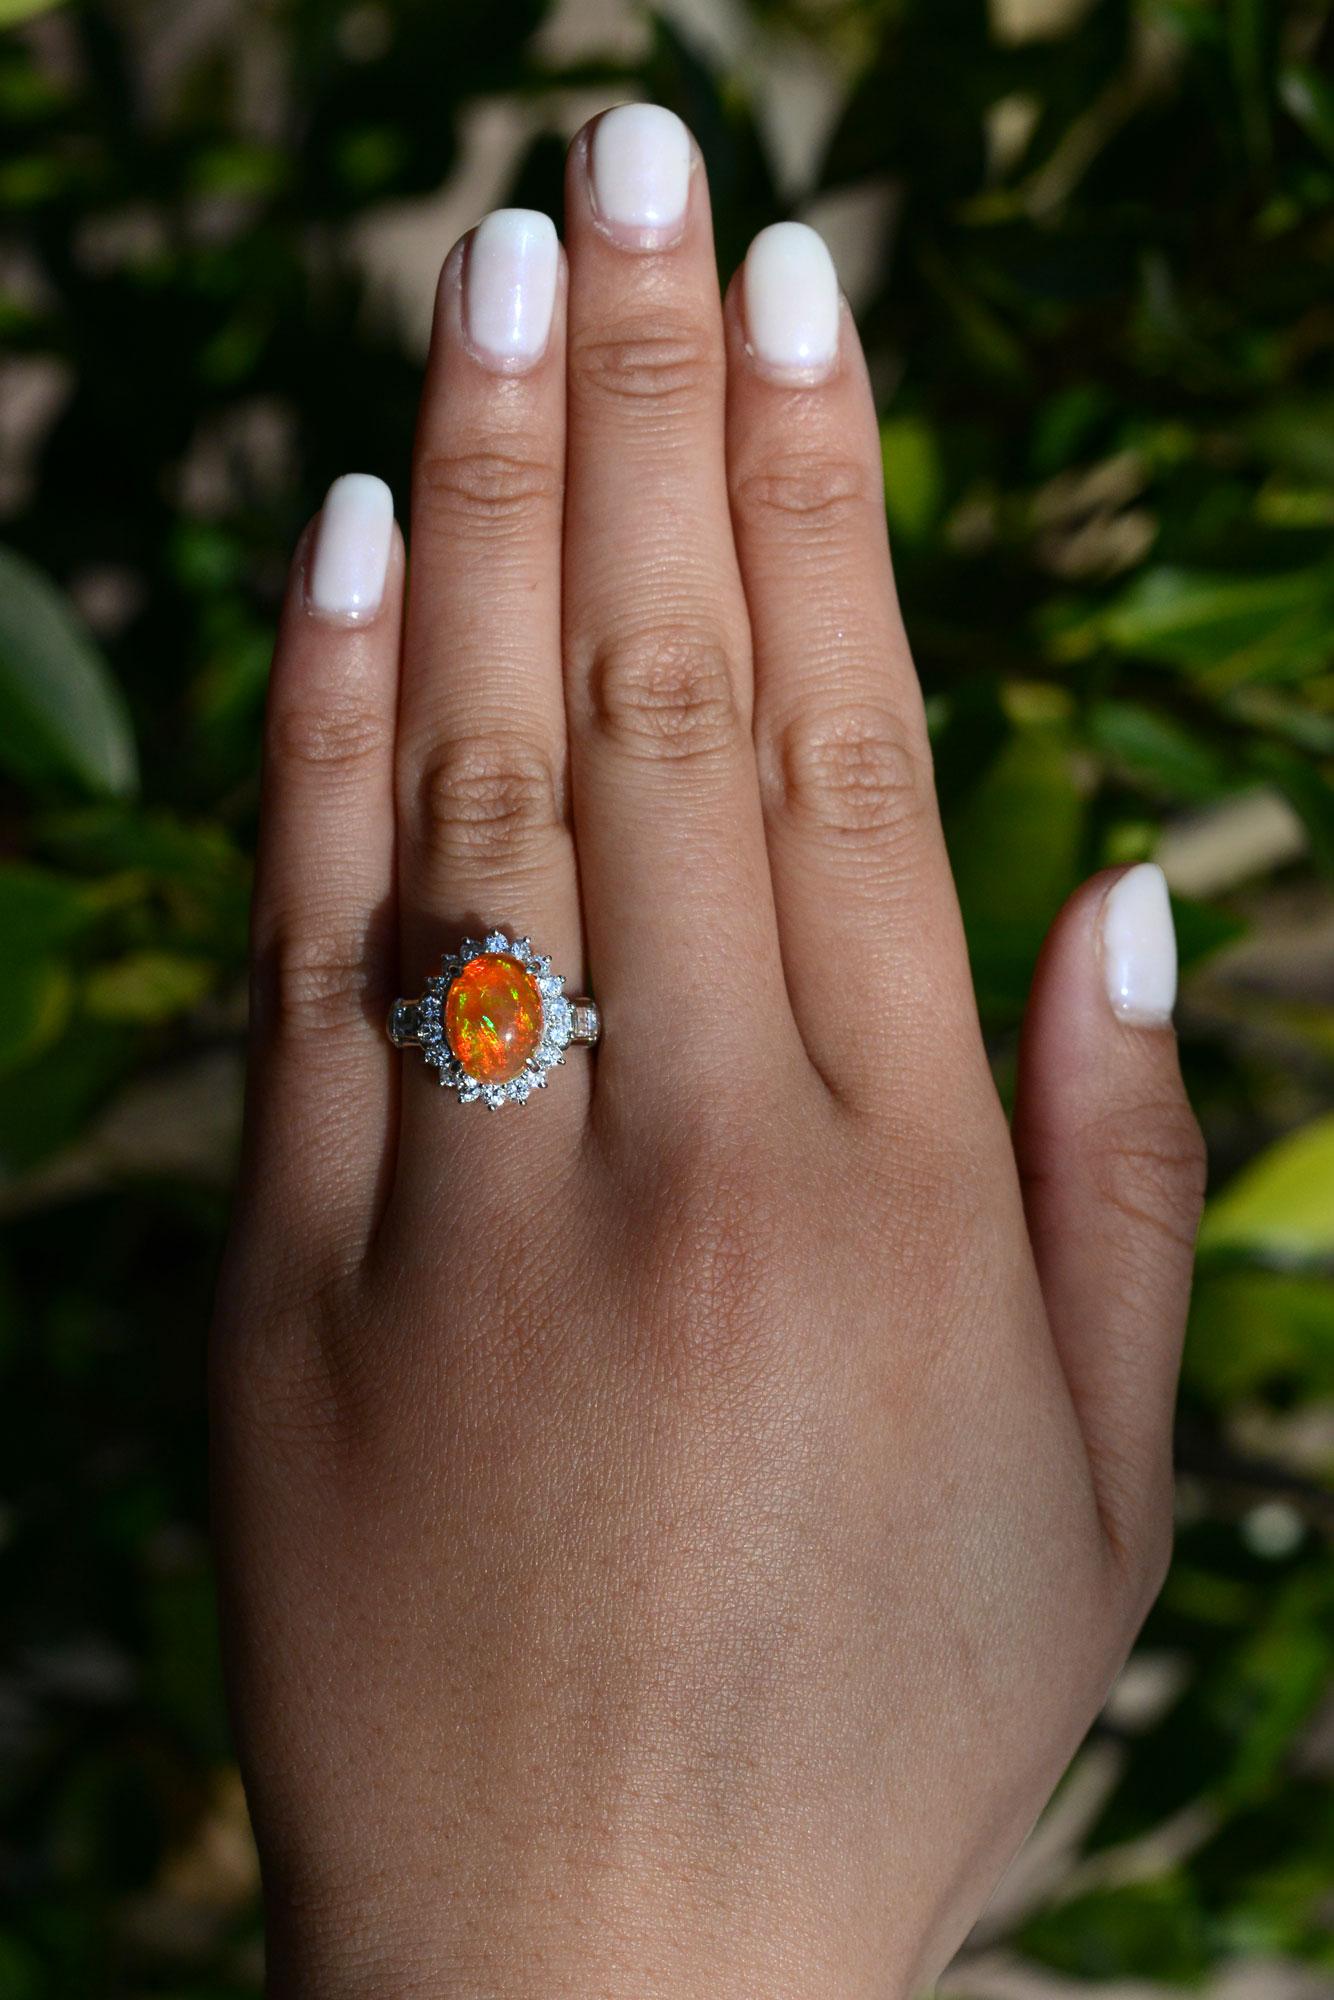 An amazing, vibrant cocktail ring displaying an incredible Mexican fire opal with a blazing orange background color and intense flashes of red, green, and yellow. Said to bring positivity and confidence to its owner, is a rare and phenomenal